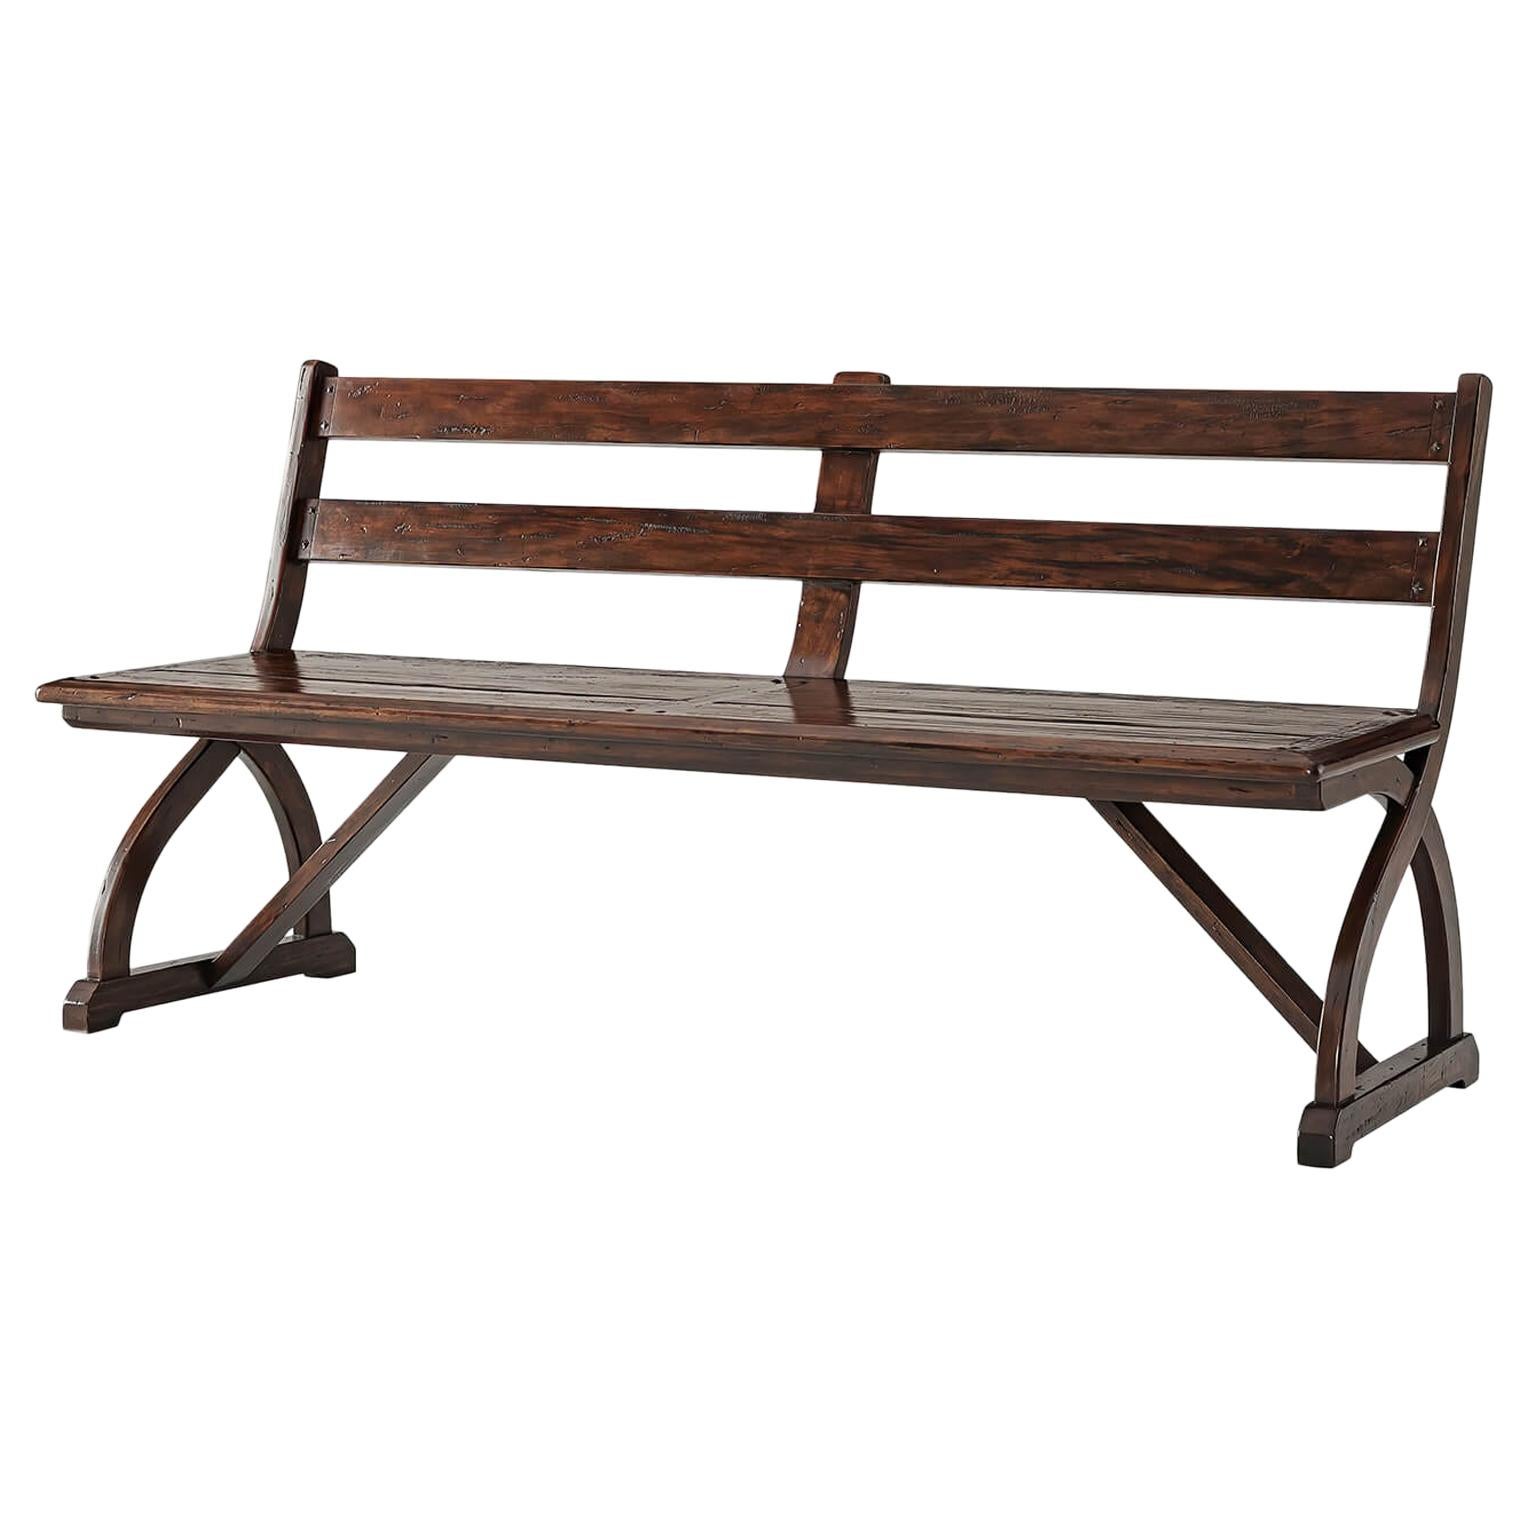 Rustic English Country Bench